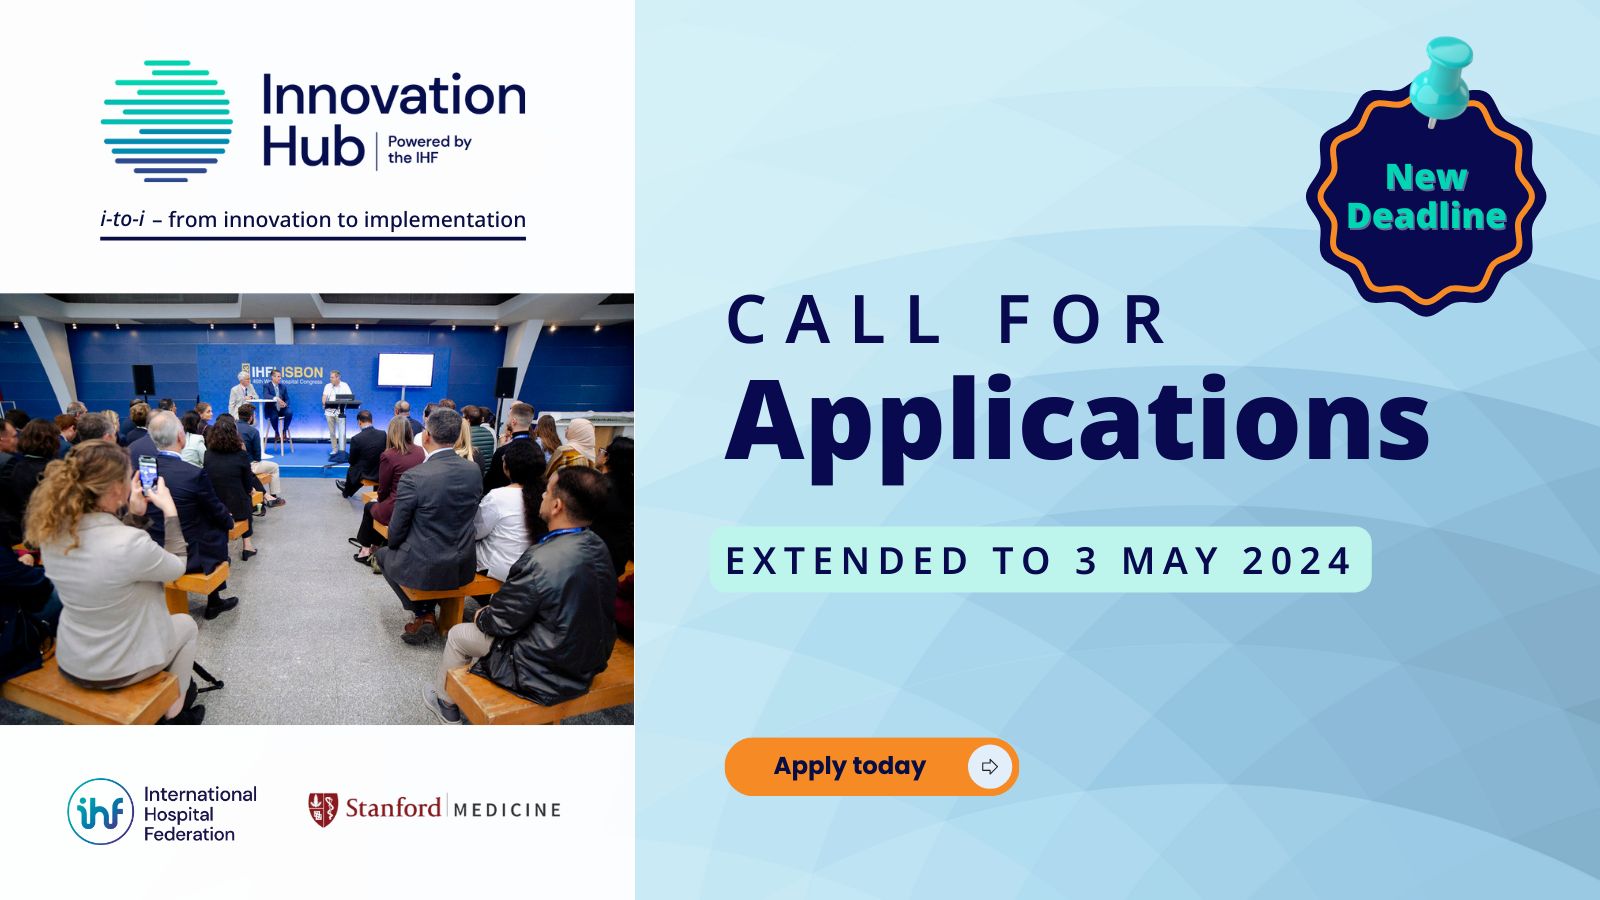 Applications for the Innovation Hub extended to 3 May